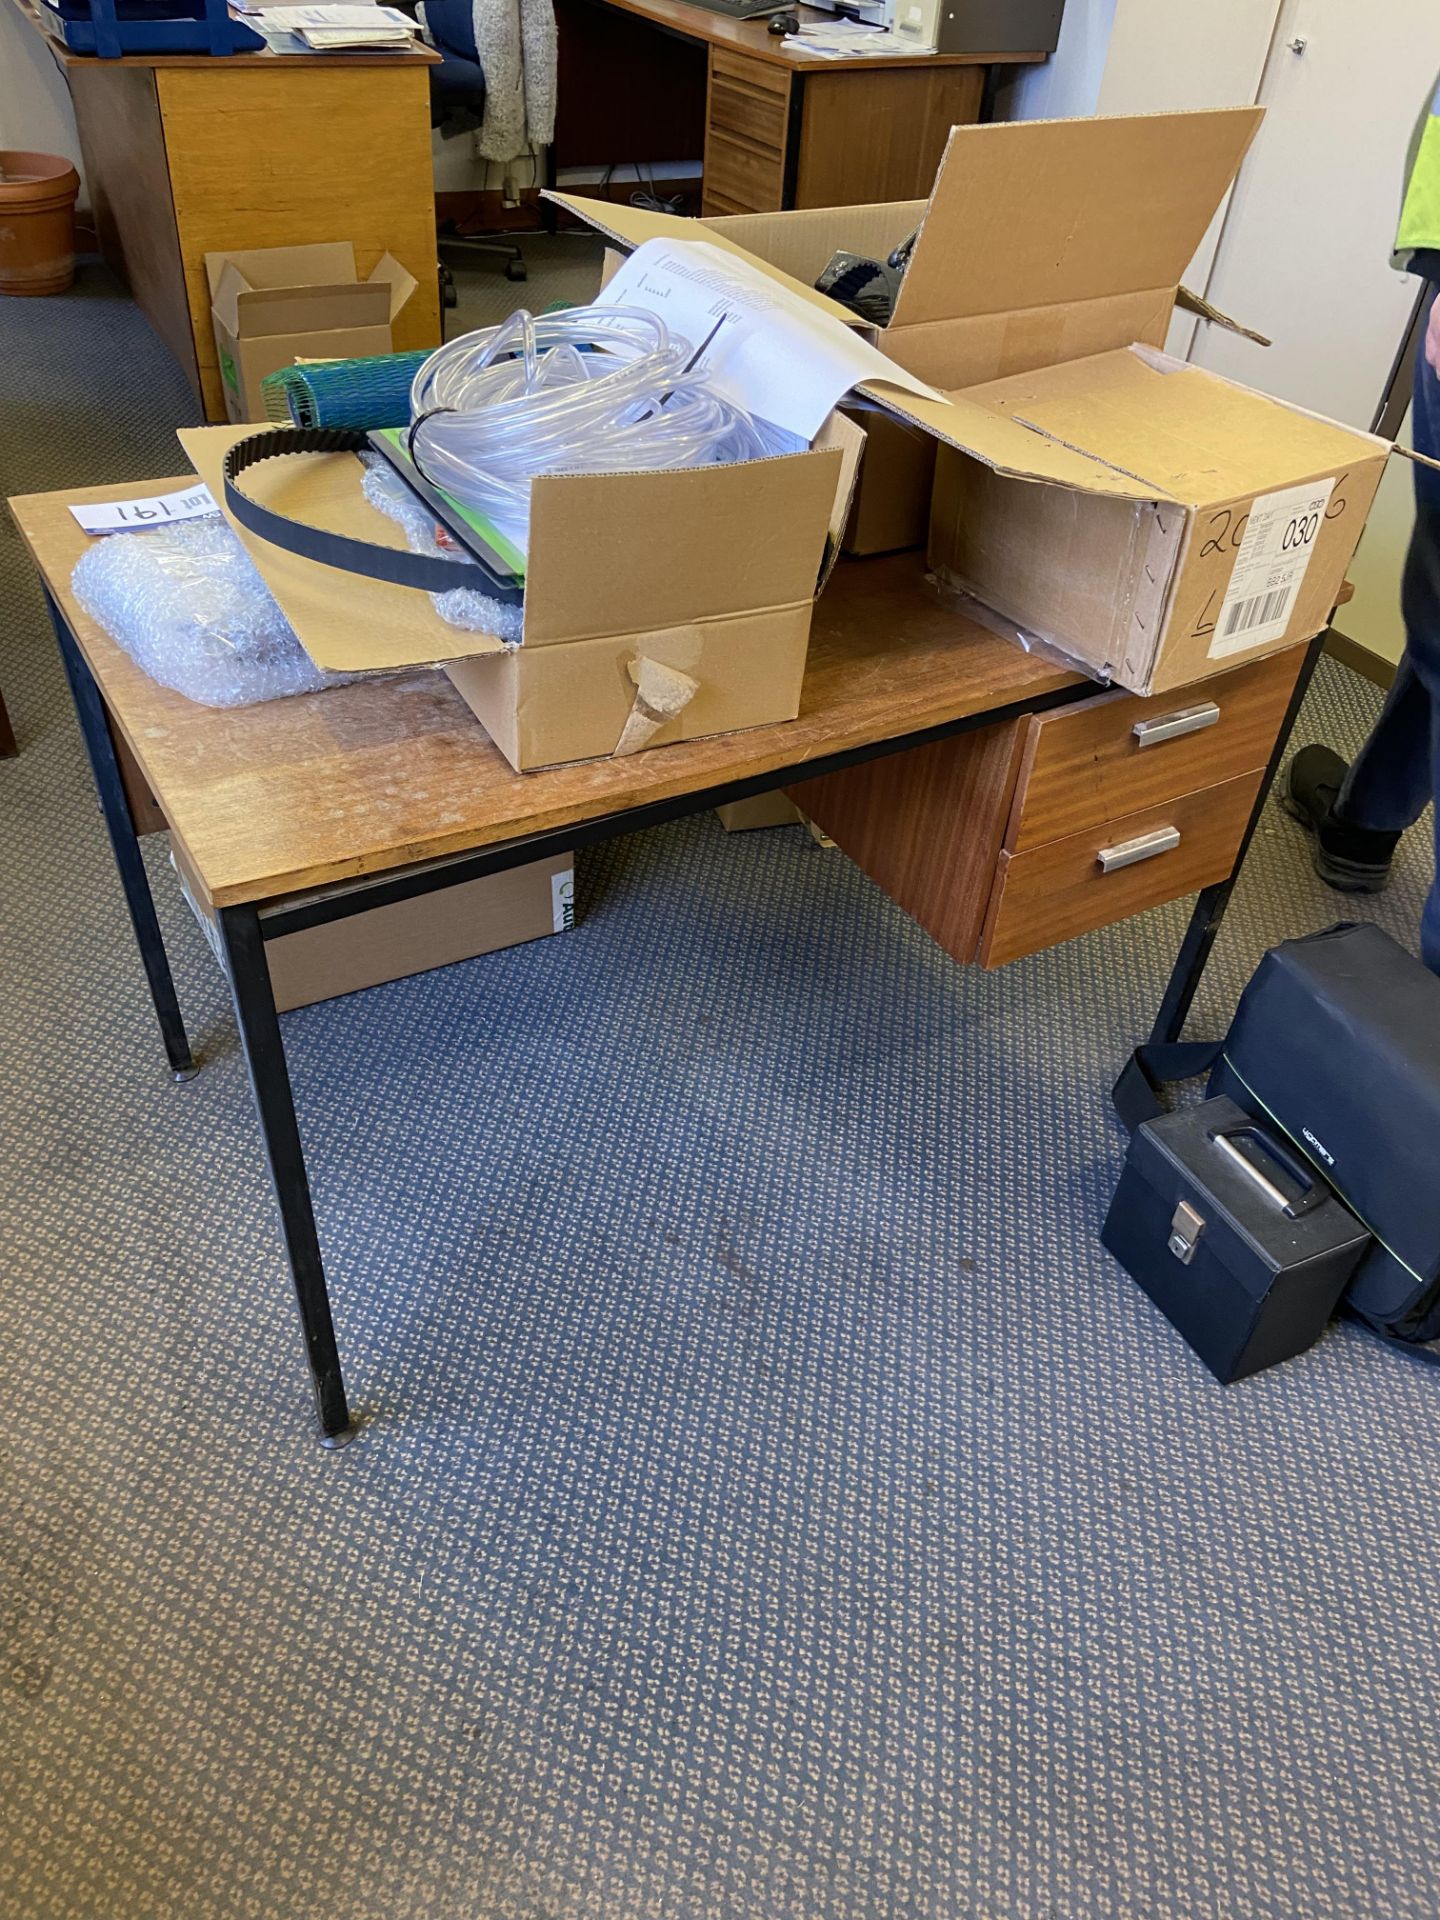 Steel Framed Single Pedestal Desk (contents excluded) (reserve removal until contents cleared)Please